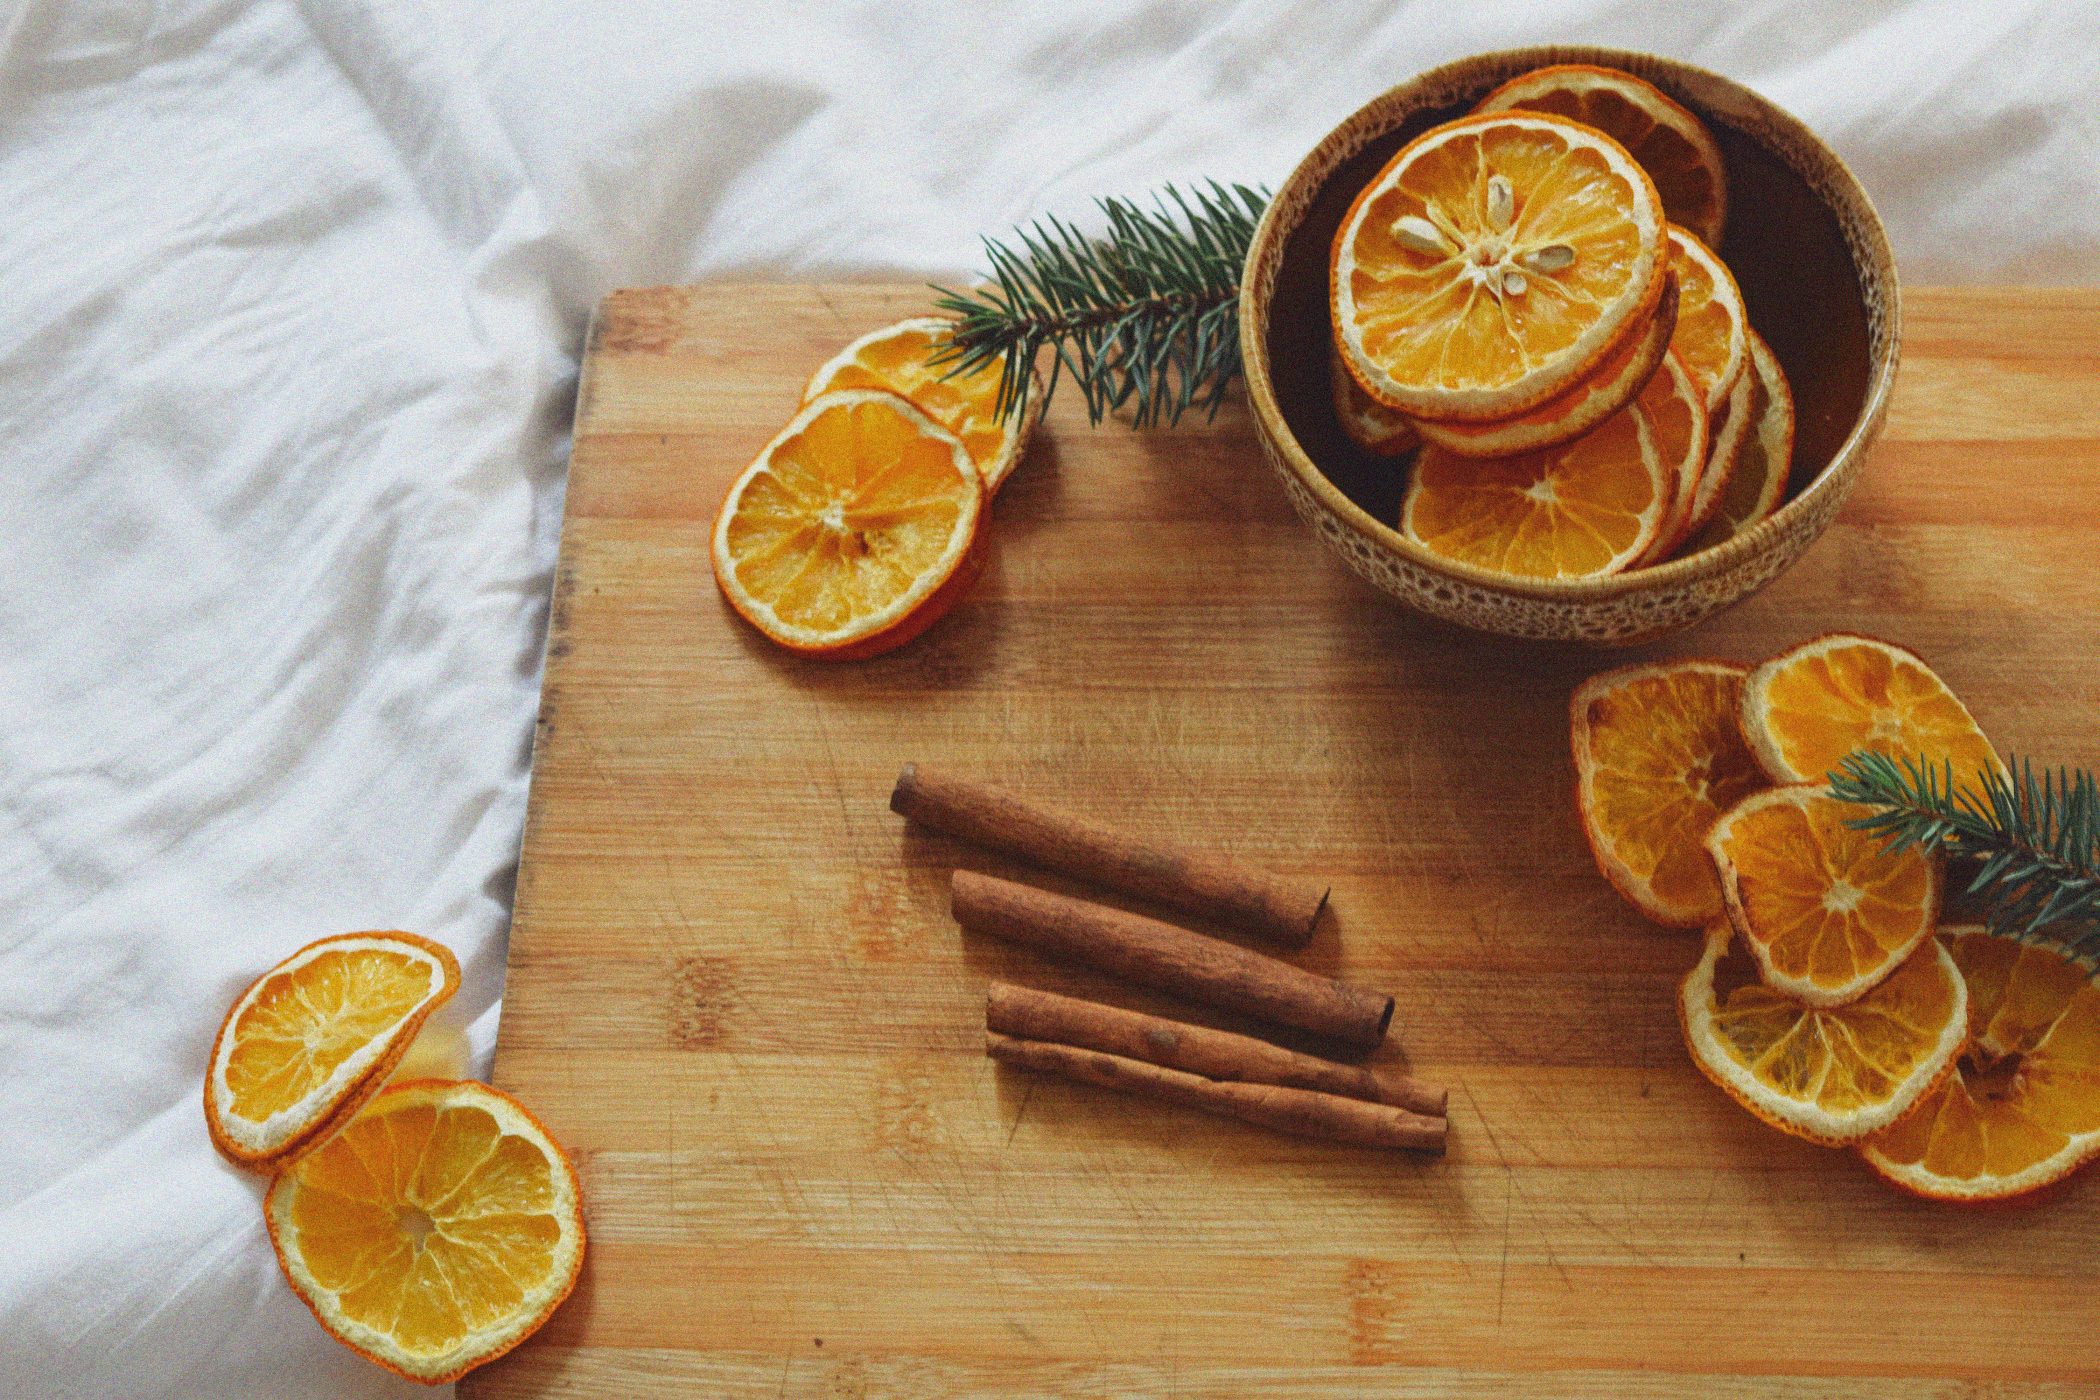 Dried oranges cut up on a wooden dish with cinnamon sticks.